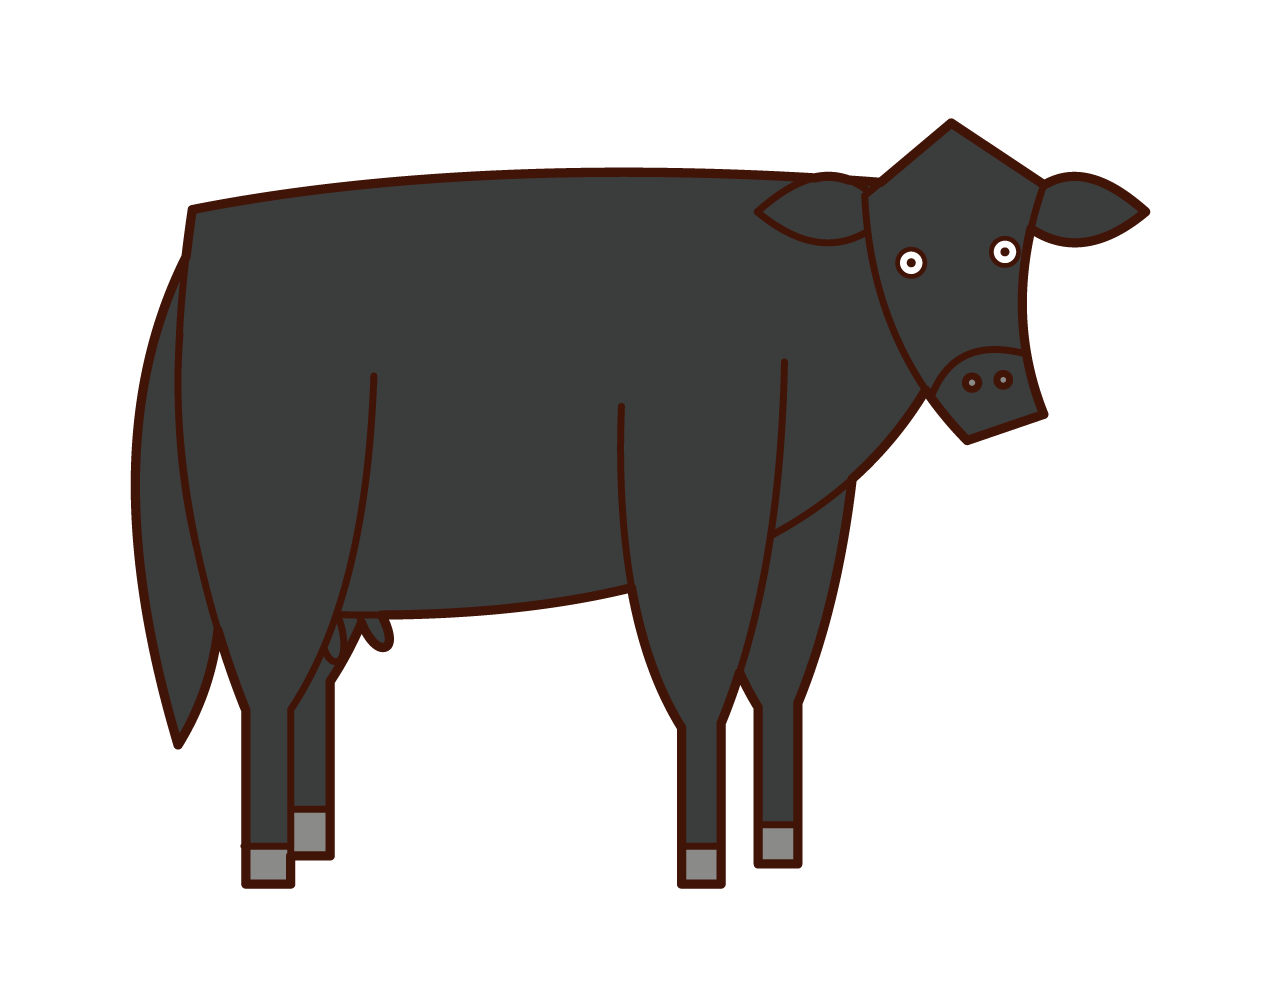 Illustration of a cow